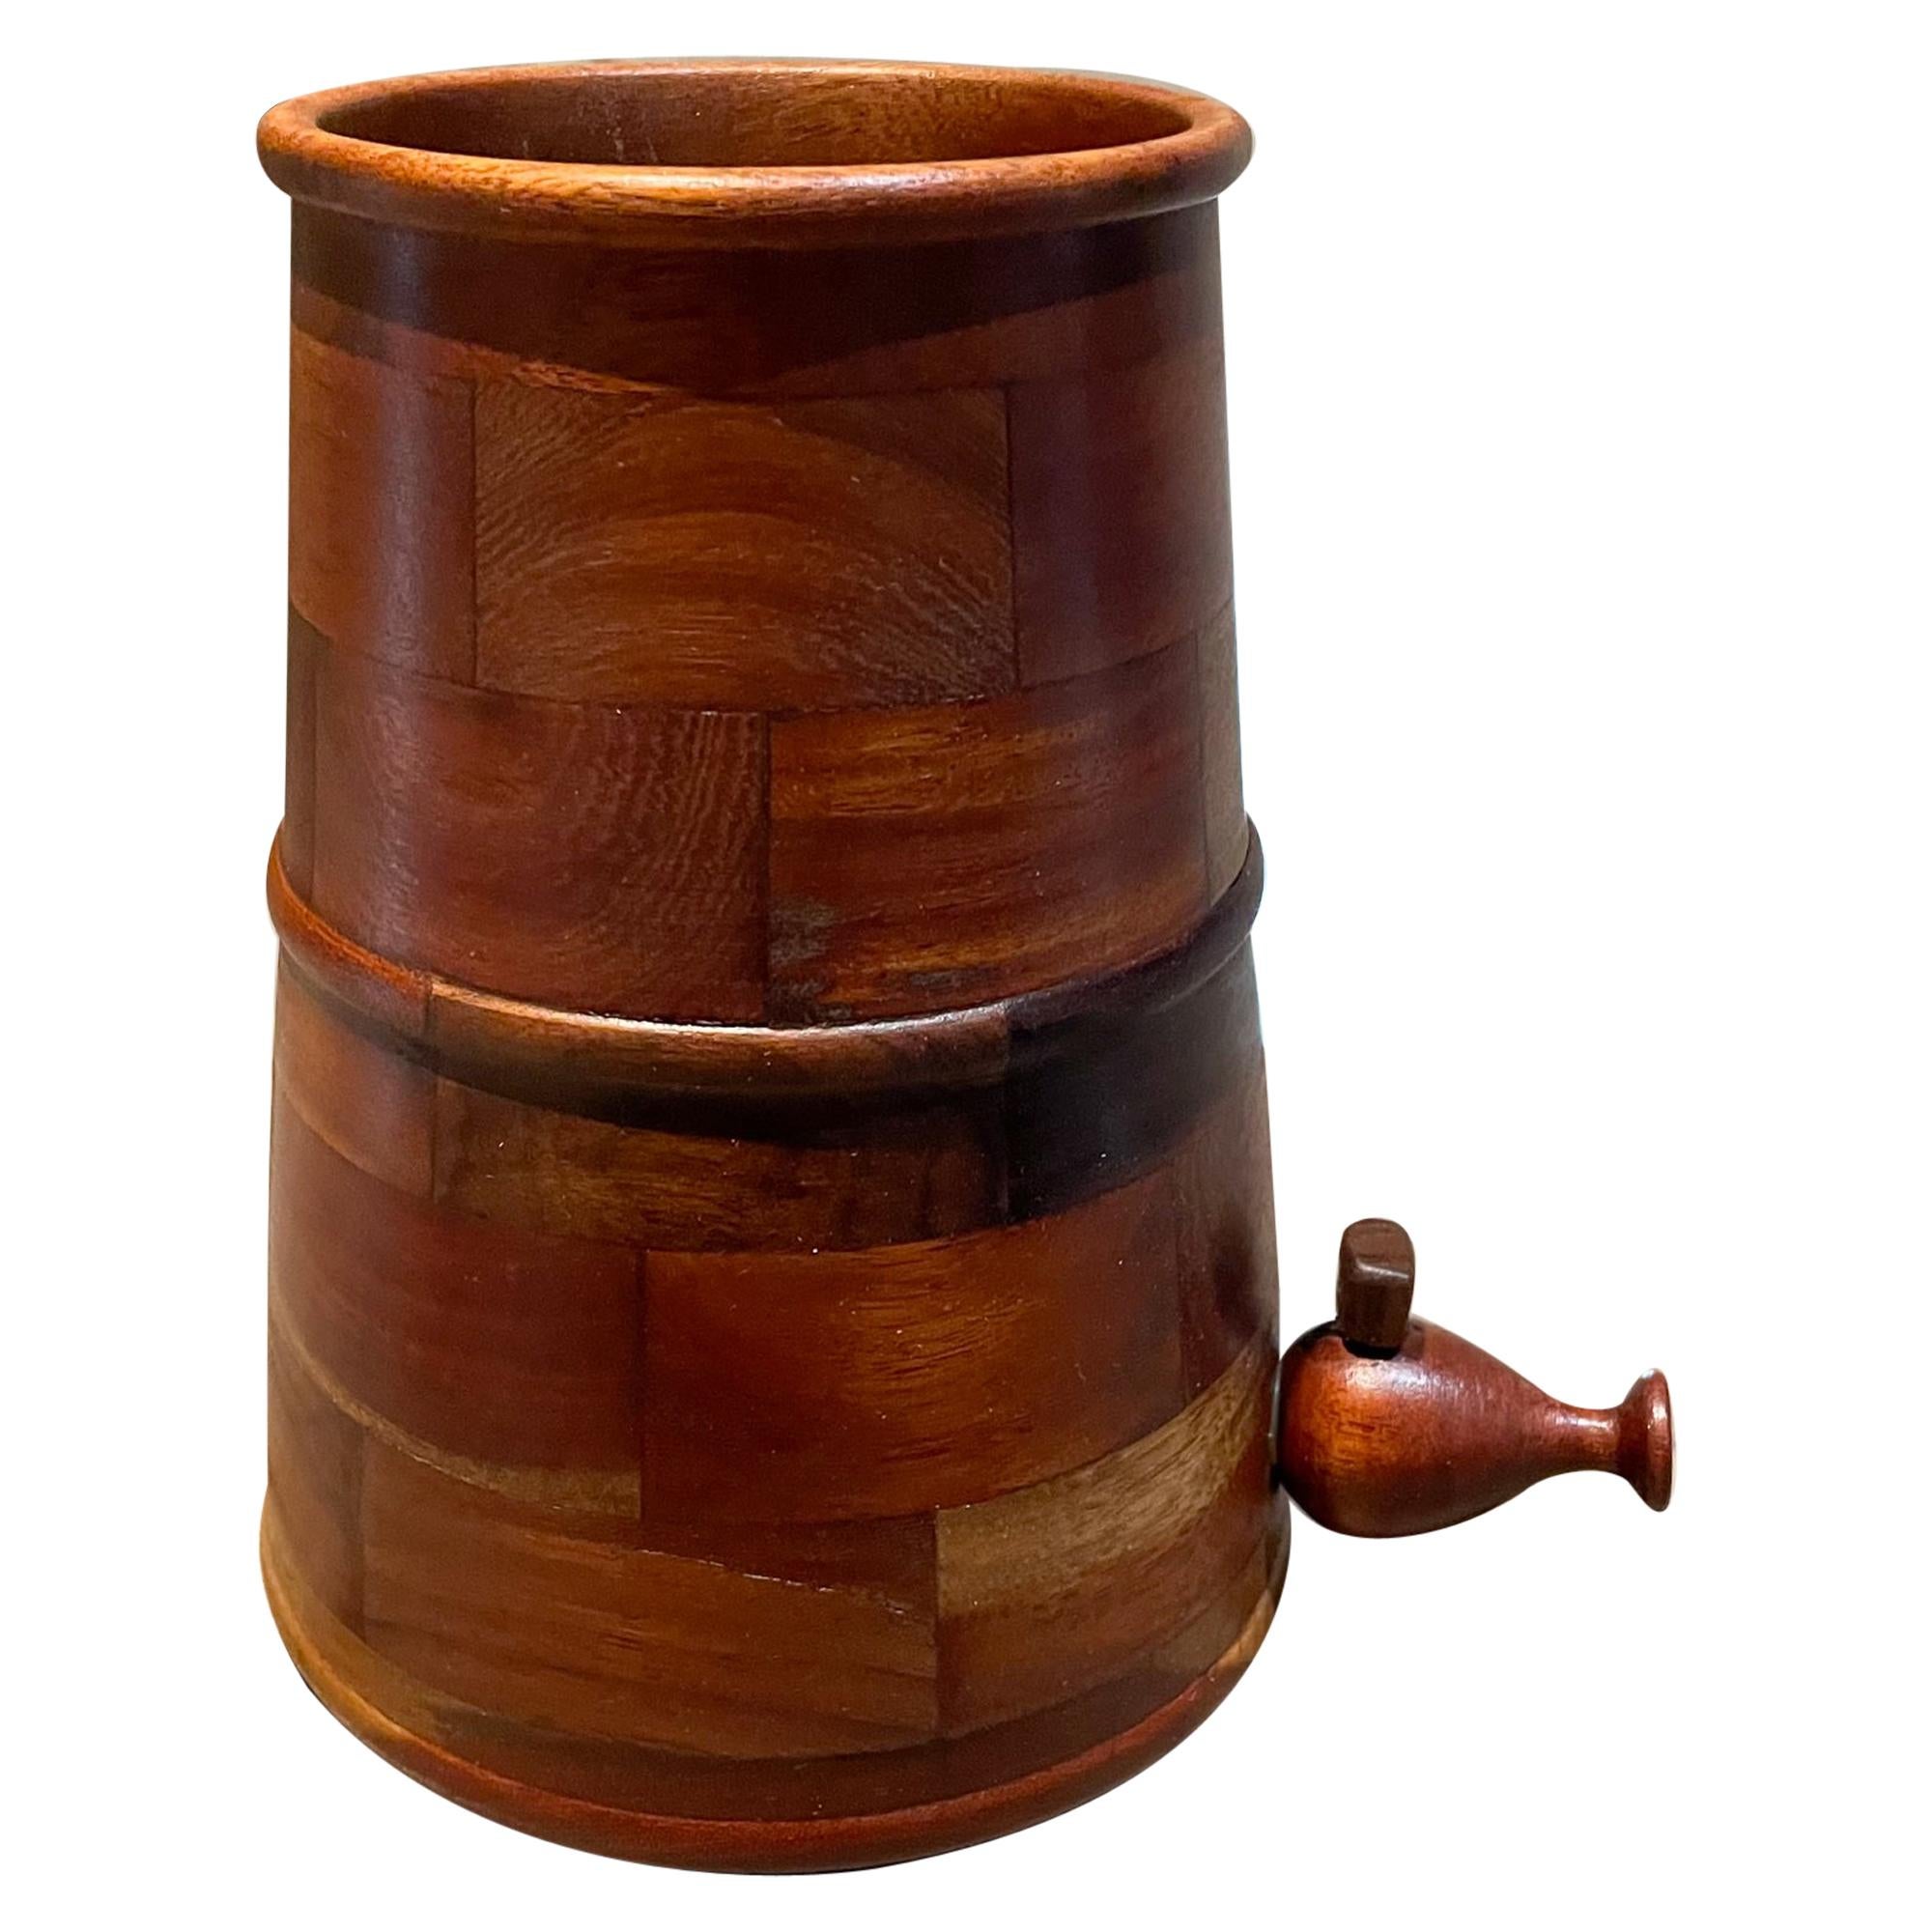 Personal Water Cooler Dispenser in Turned Wood Don Shoemaker 1970s Modern Mexico